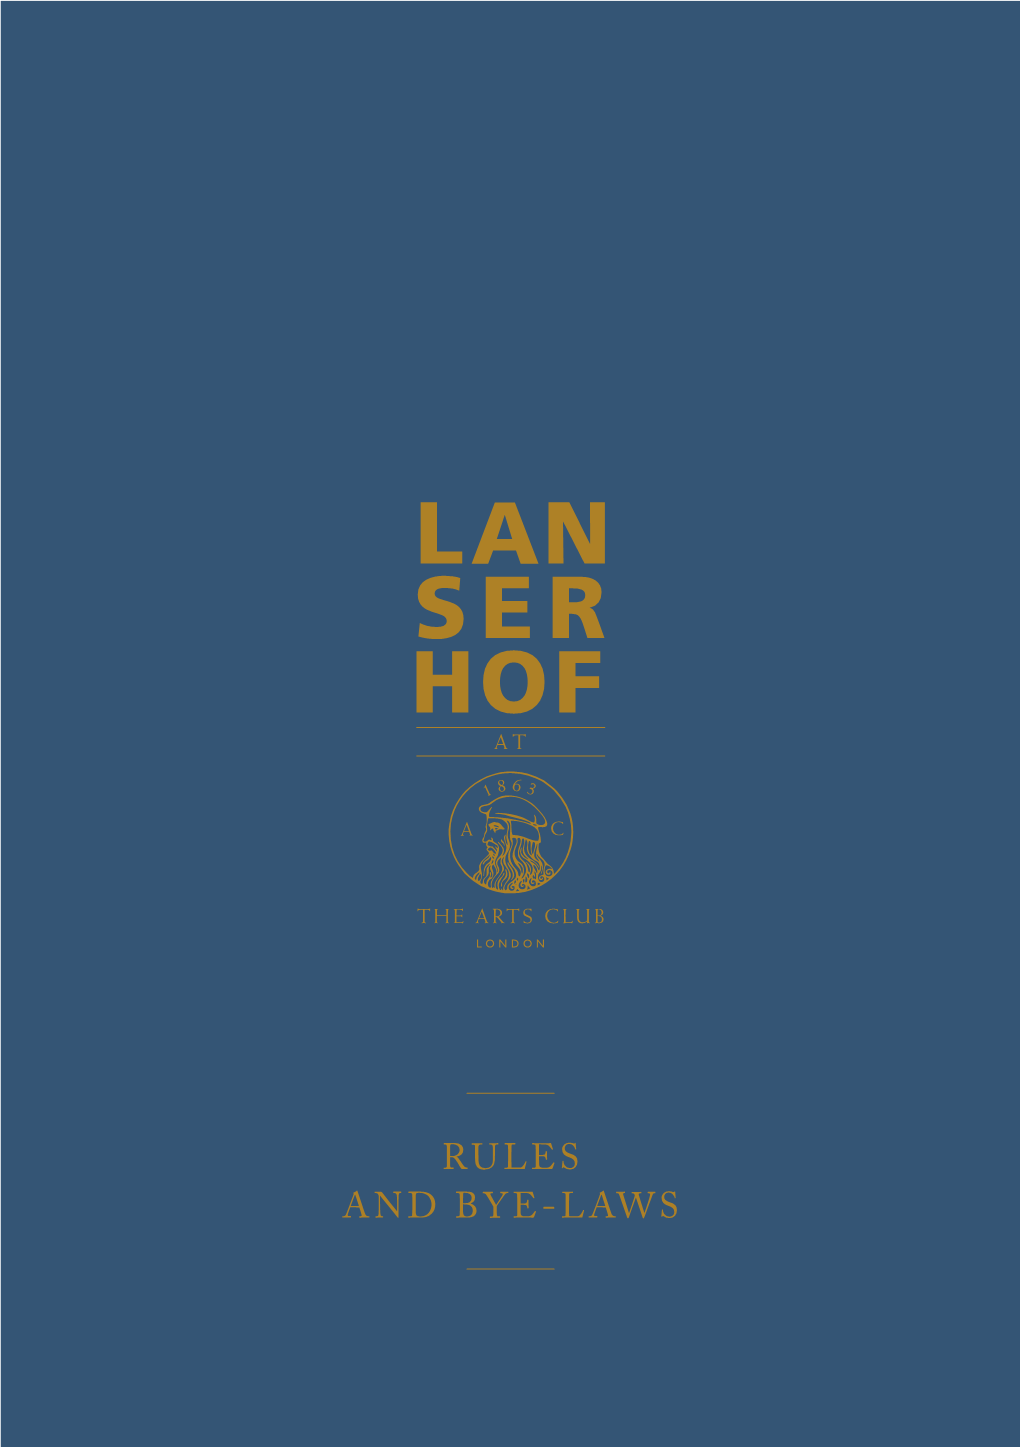 Rules and Bye-Laws